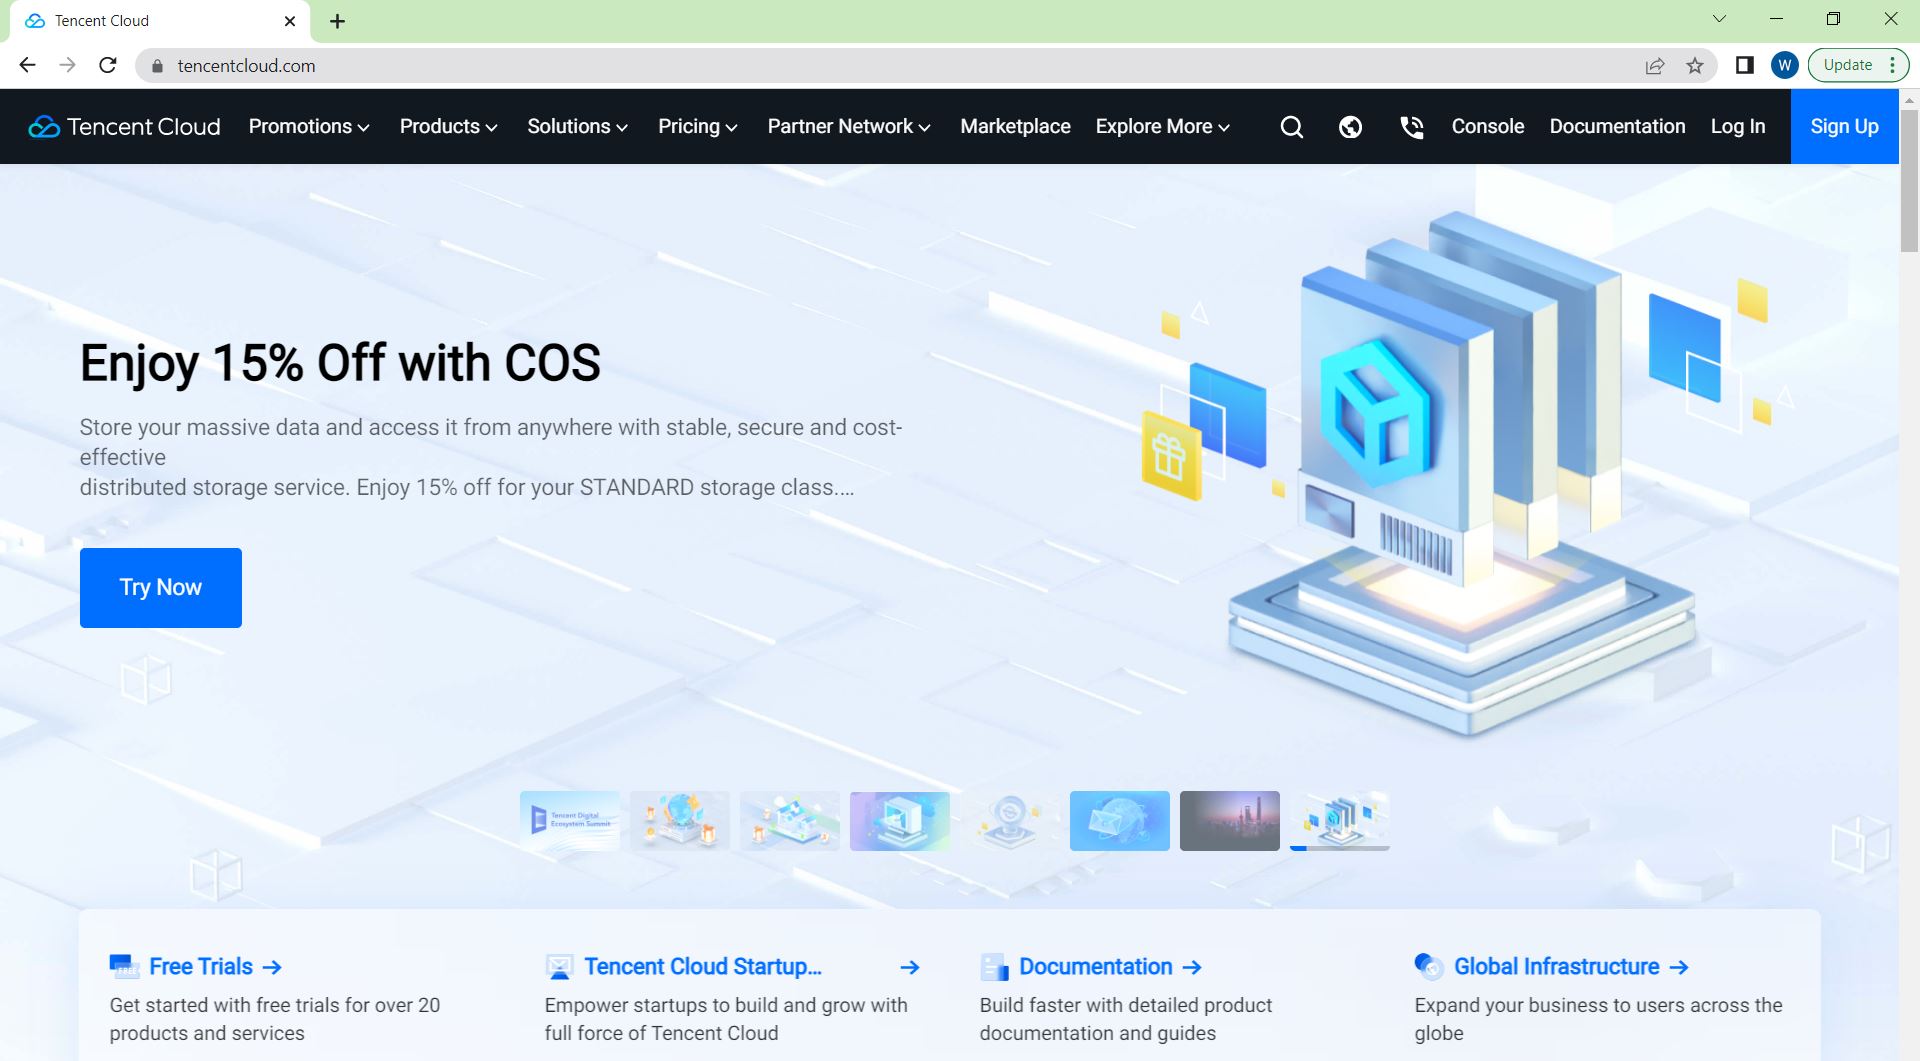 Tencent Cloud homepage